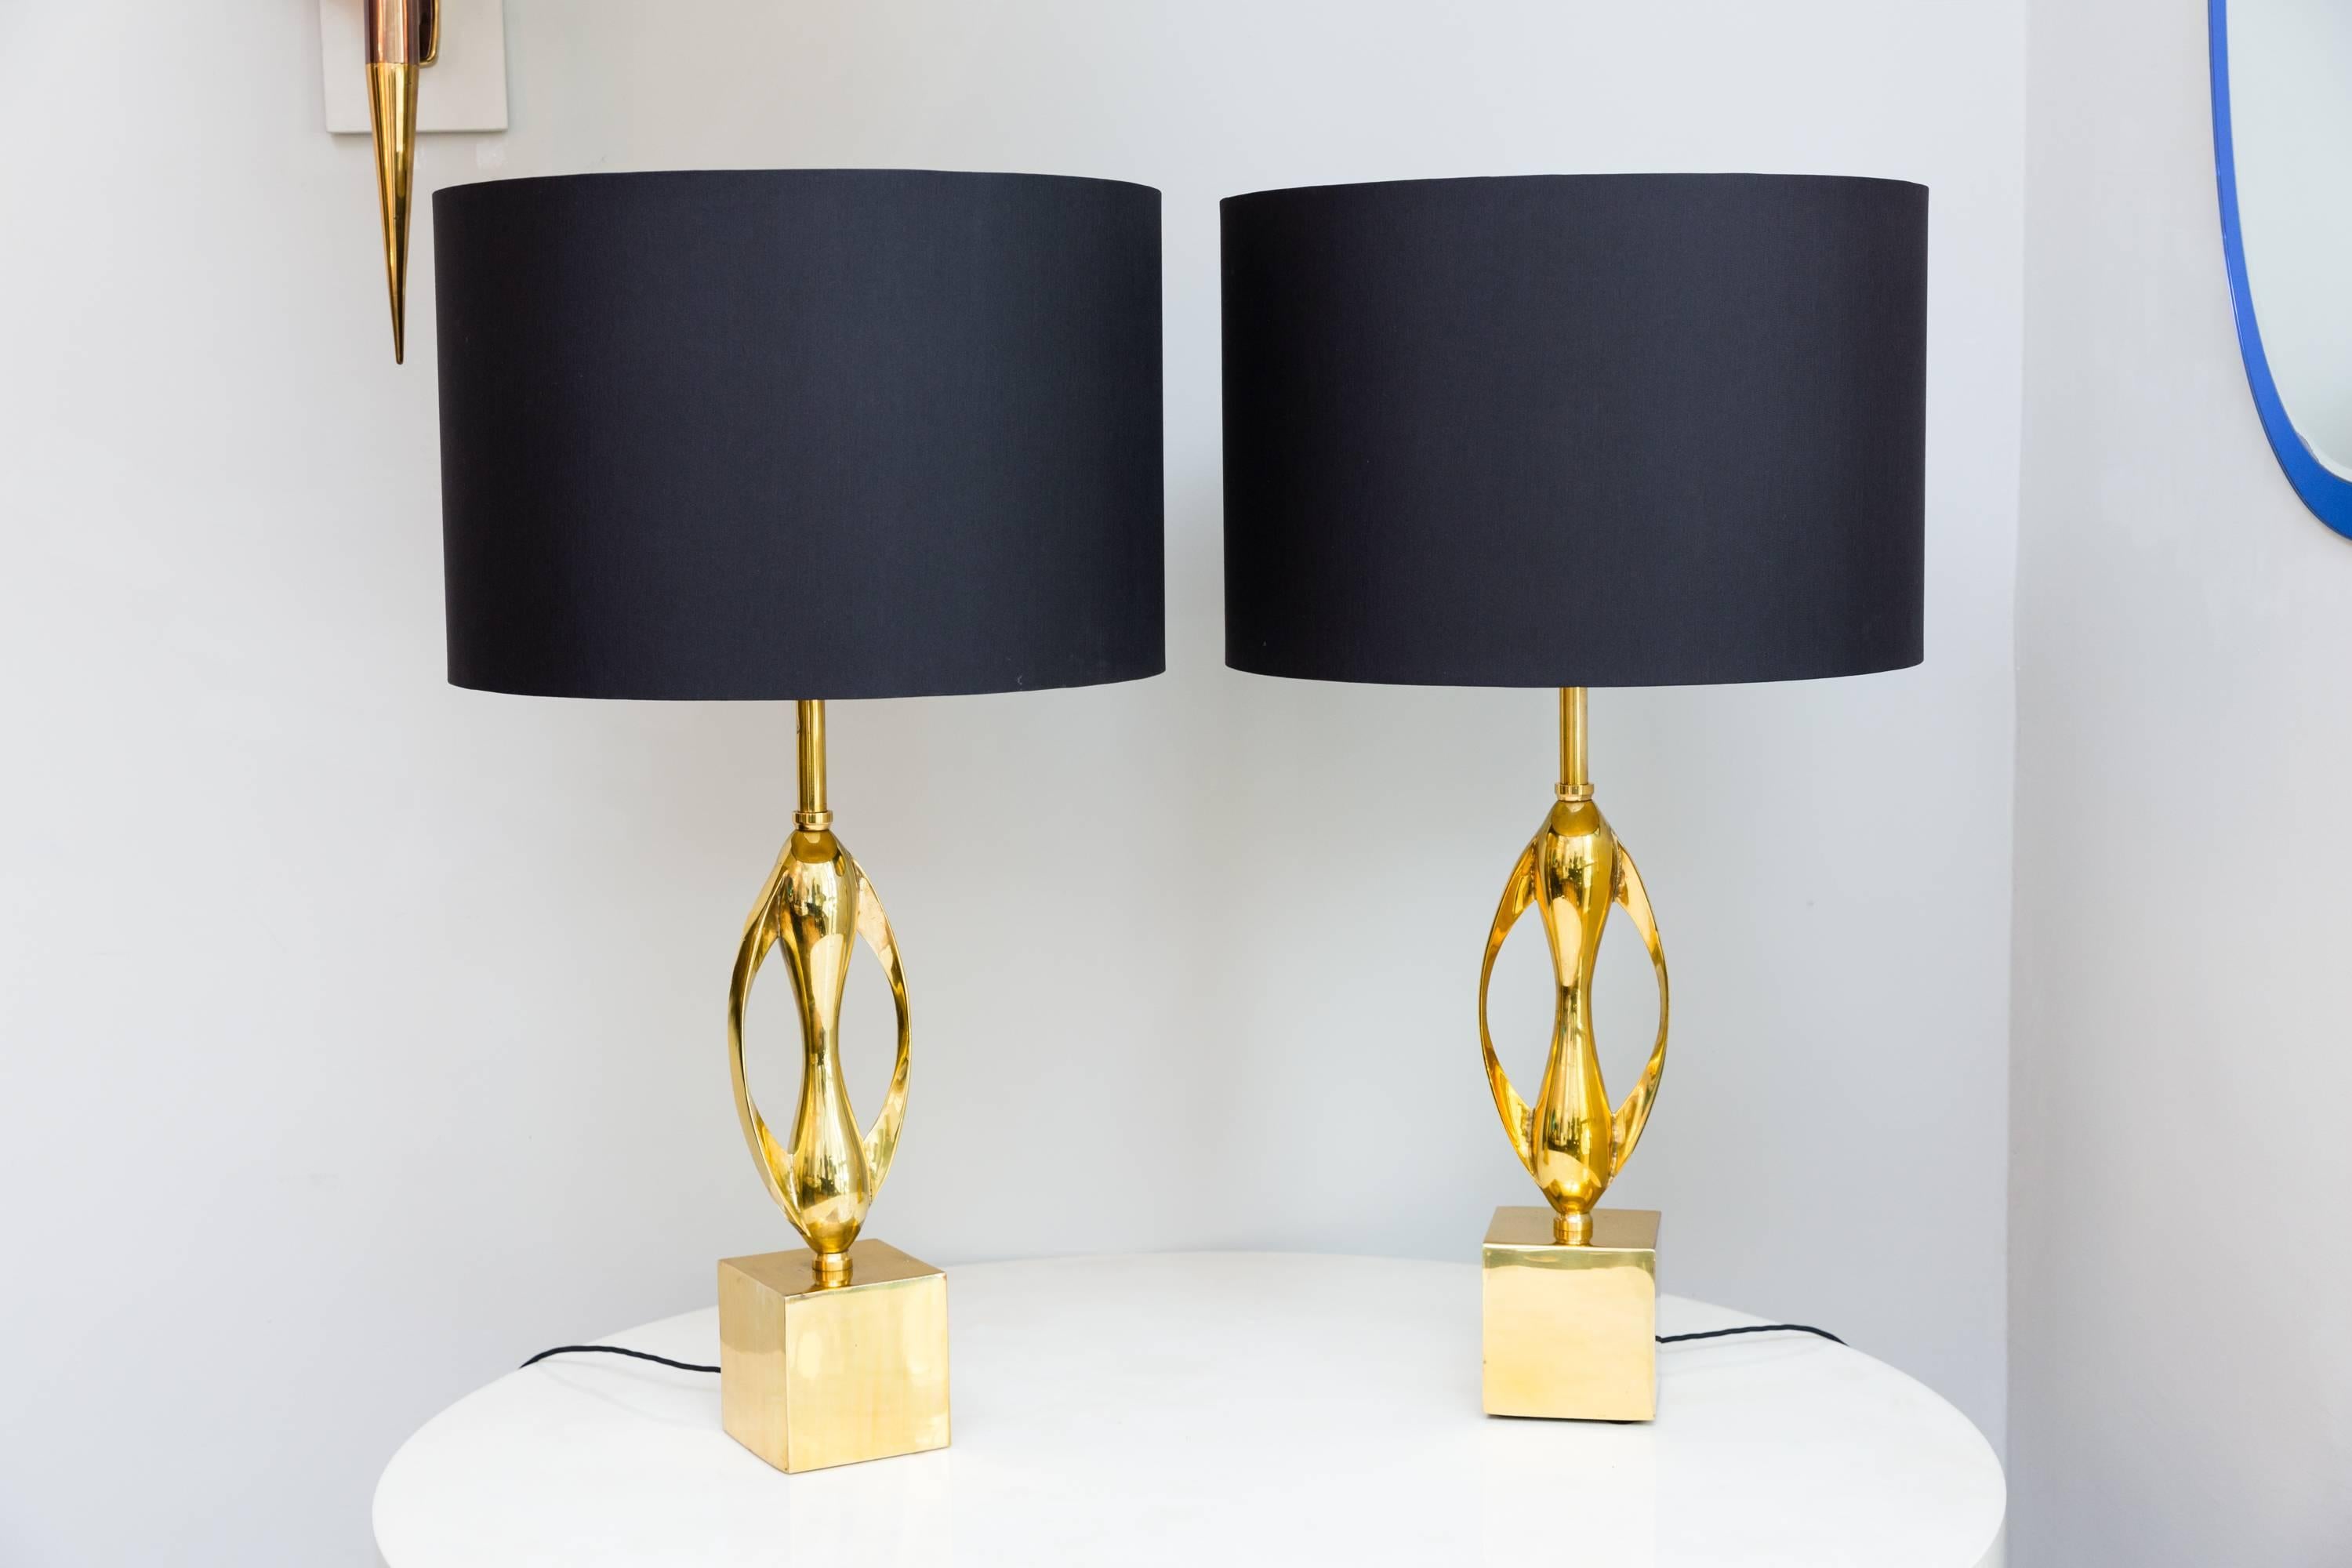 Beautiful pair of table lamps by Maison Charles, Paris, France, circa 1970, heavy solid brass, elegant brass sculpture shape, rewired with black cotton cable, new handmade black silk shade inside golden.
New polished surface, some slight oxidation